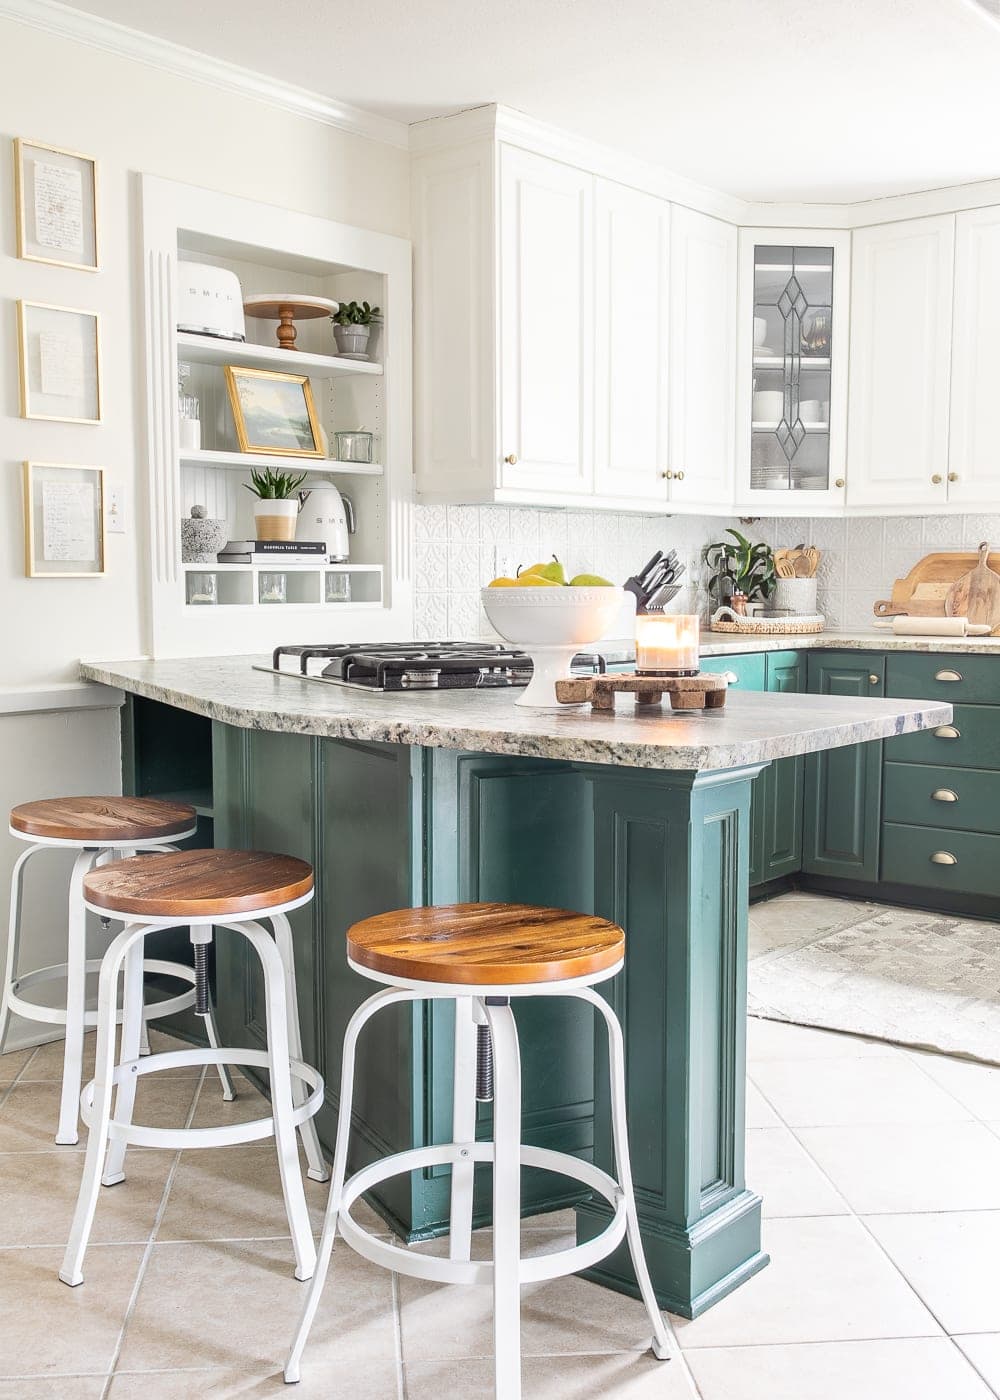 kitchen counter decor and kitchen shelves with green cabinets